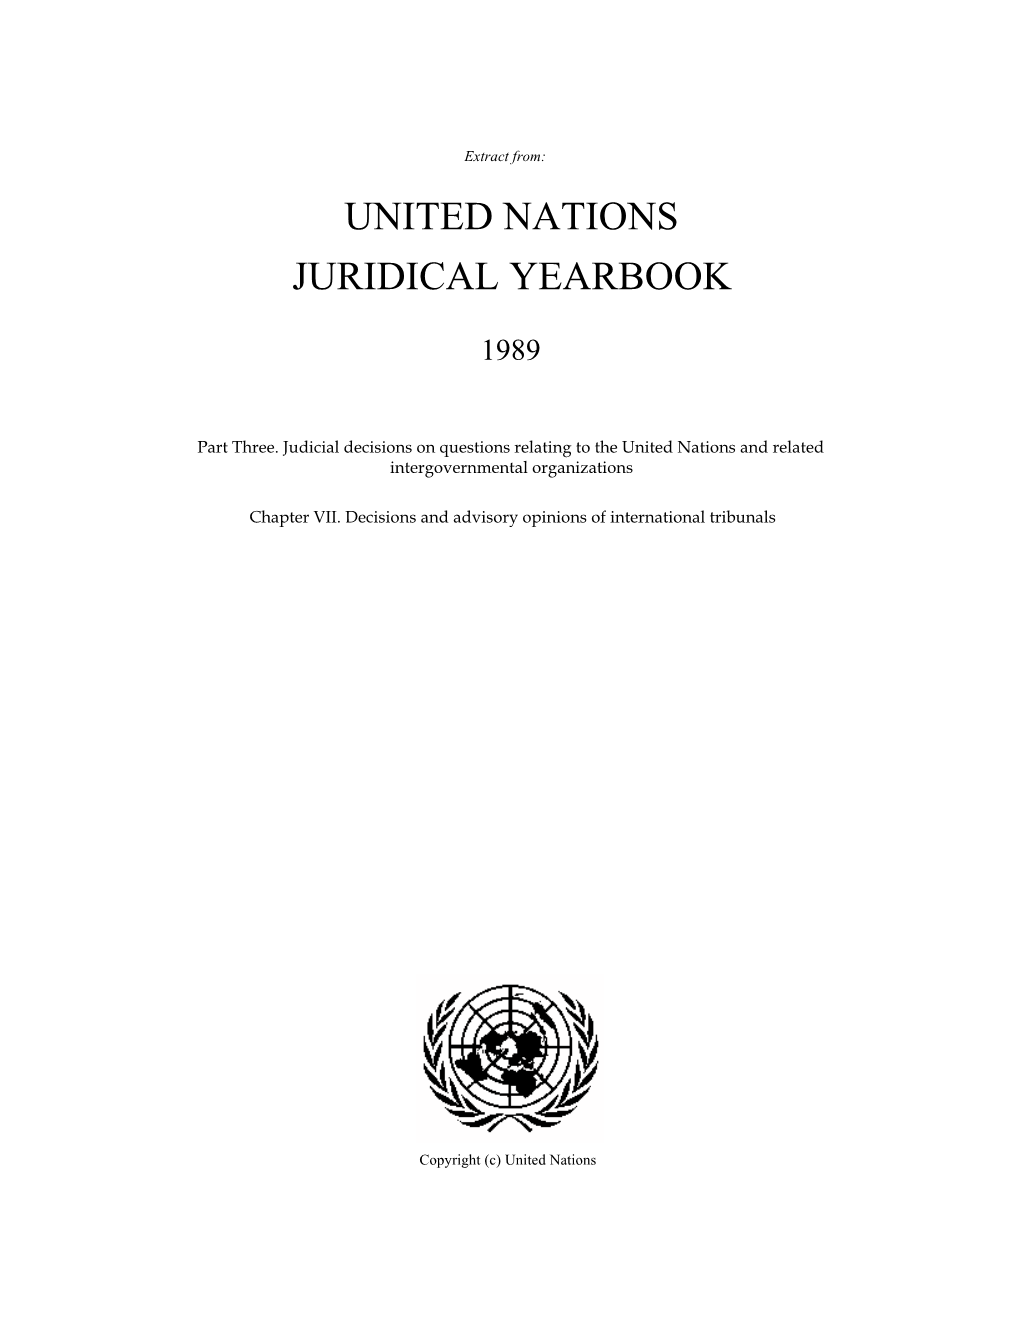 United Nations Juridical Yearbook, 1989 – Chapter VII. Decisions And